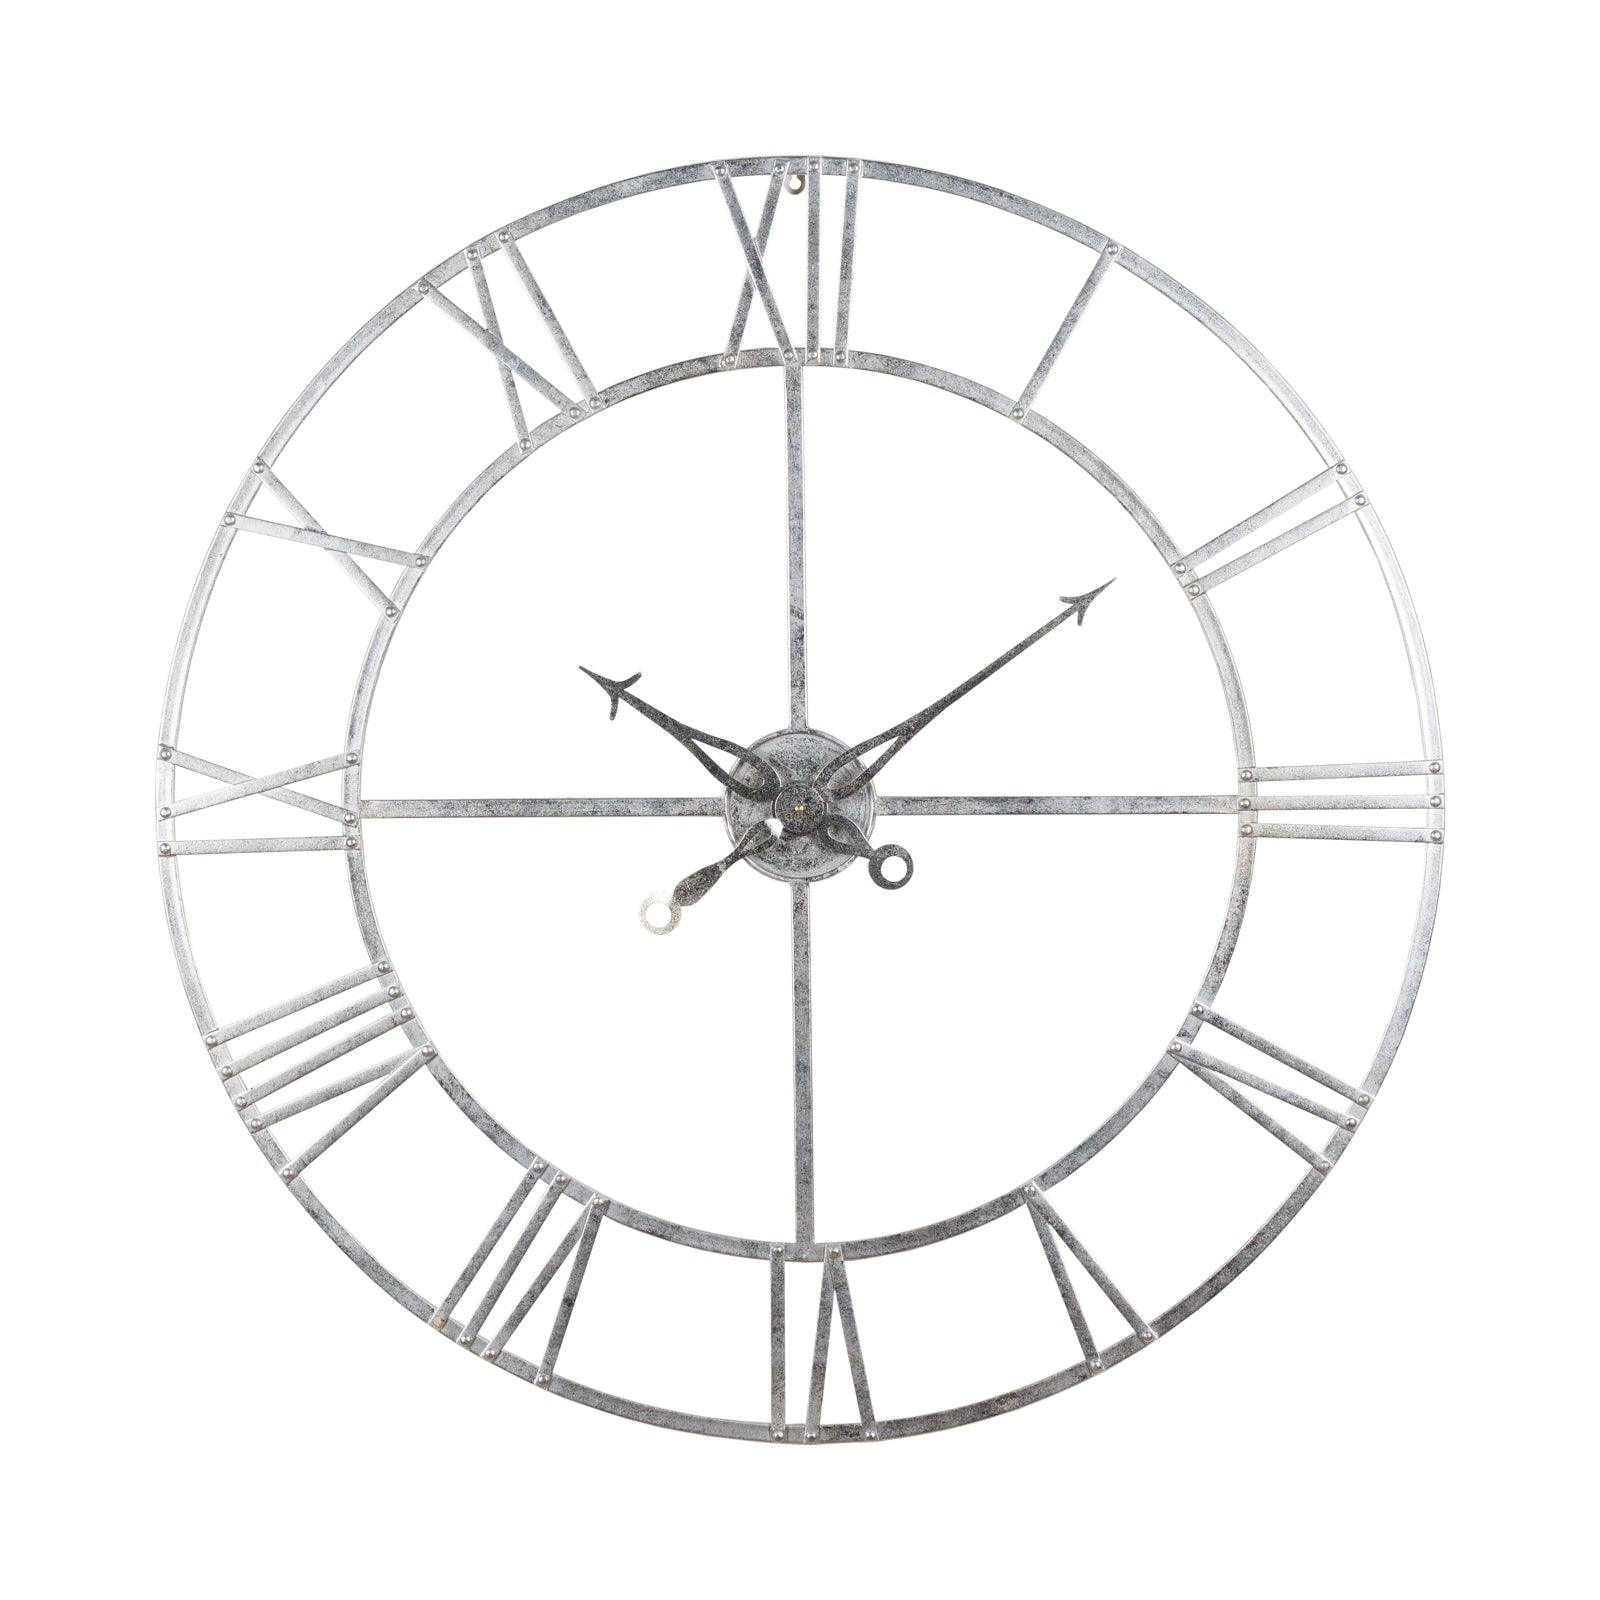 View Large Silver Foil Skeleton Wall Clock information